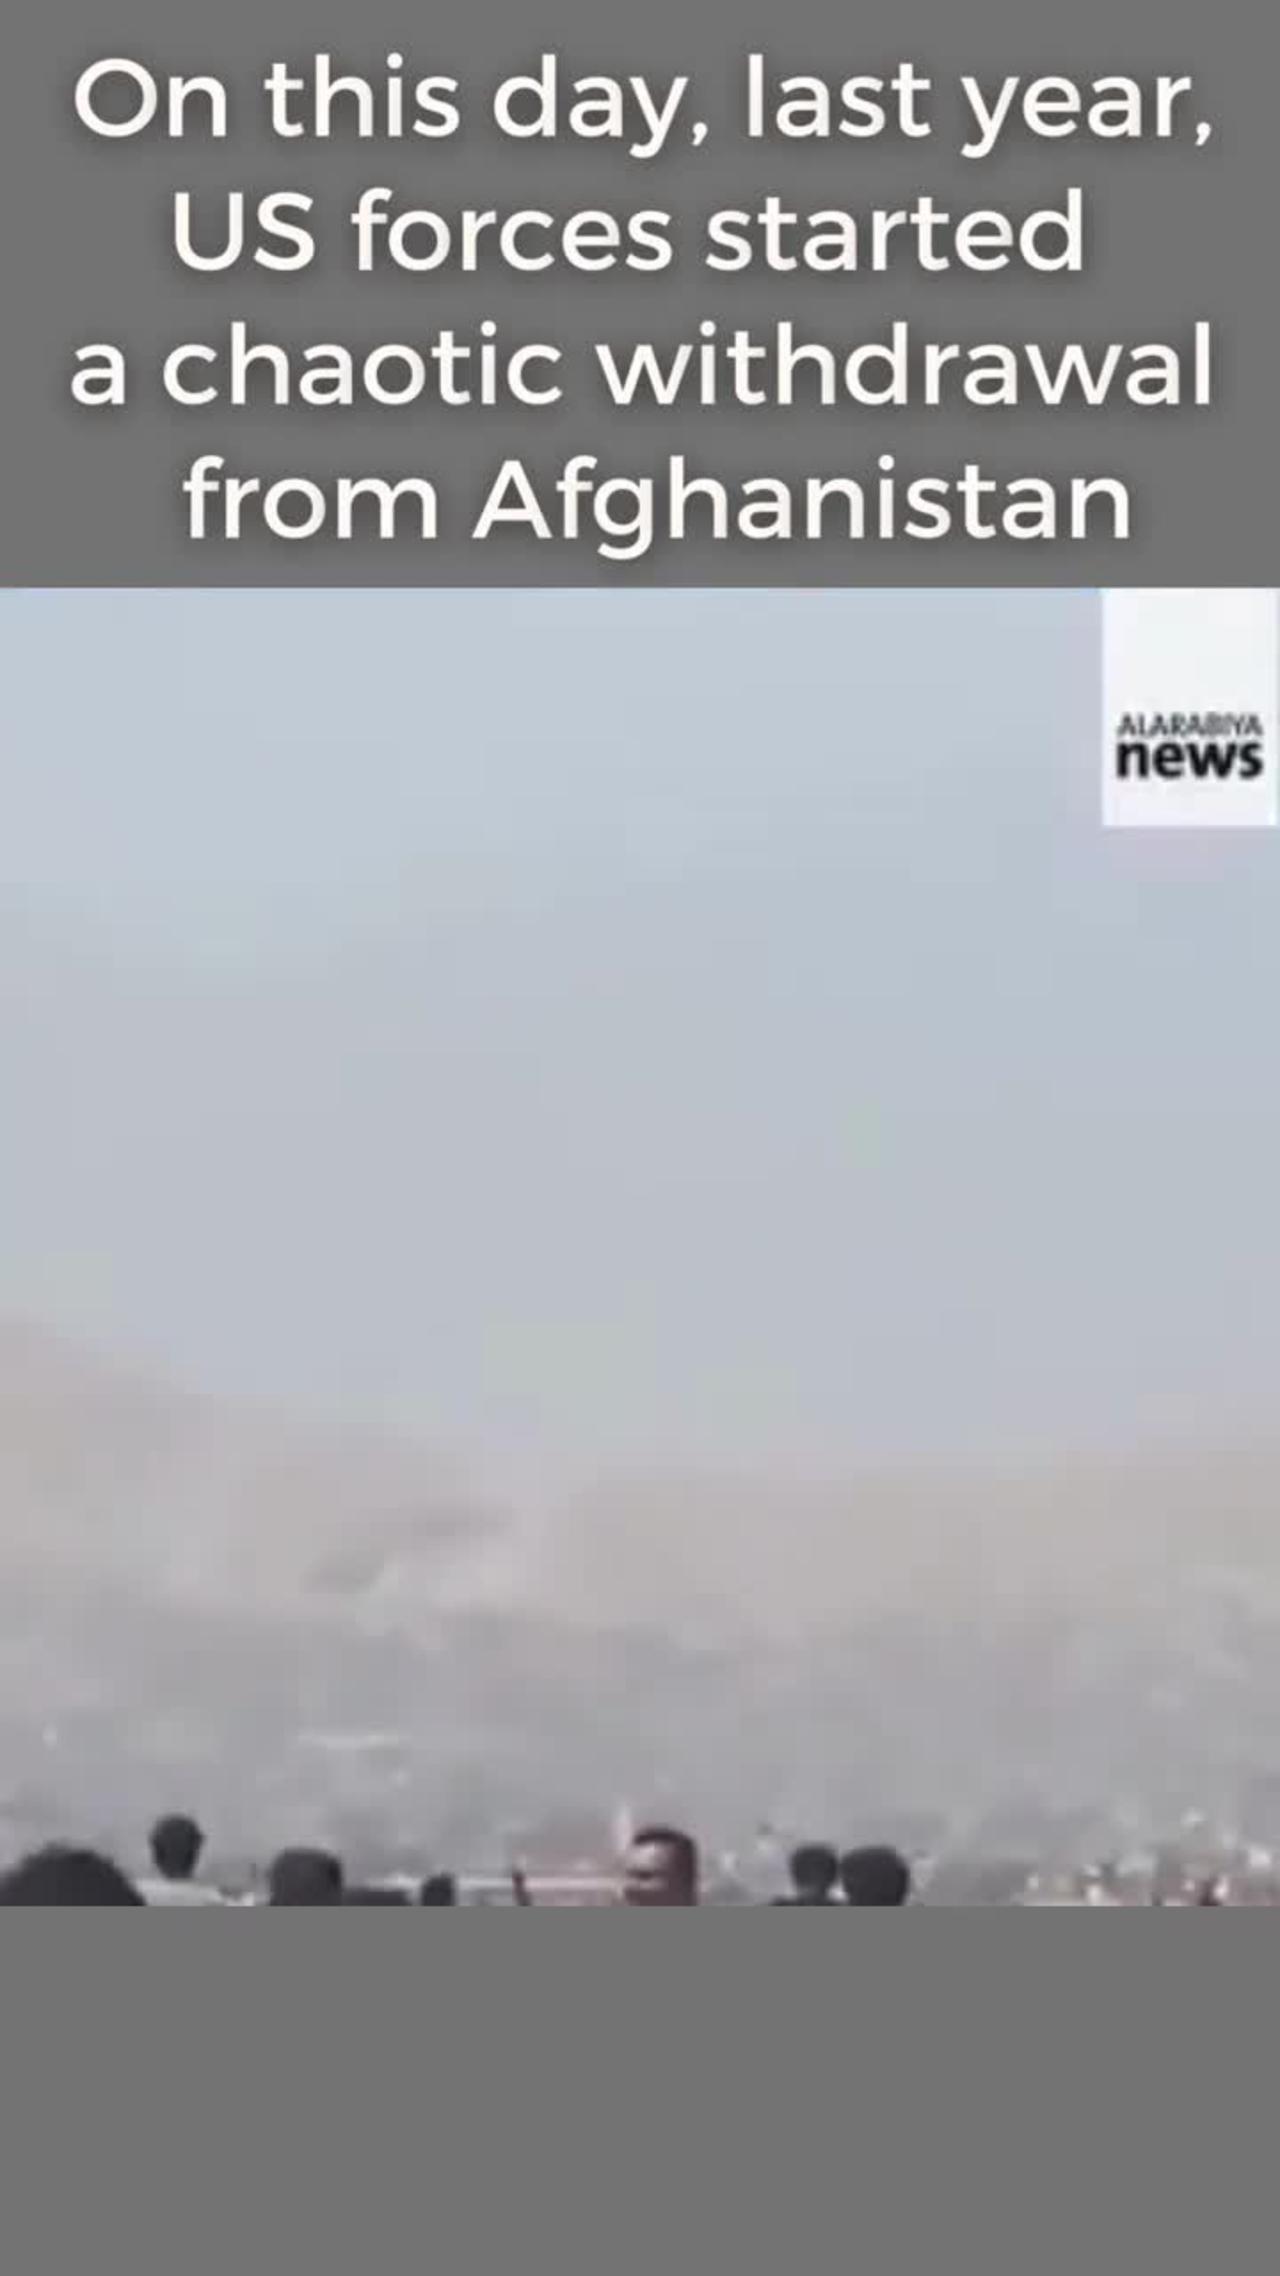 On this day, last year, the US made a messy withdrawl from Afghanistan